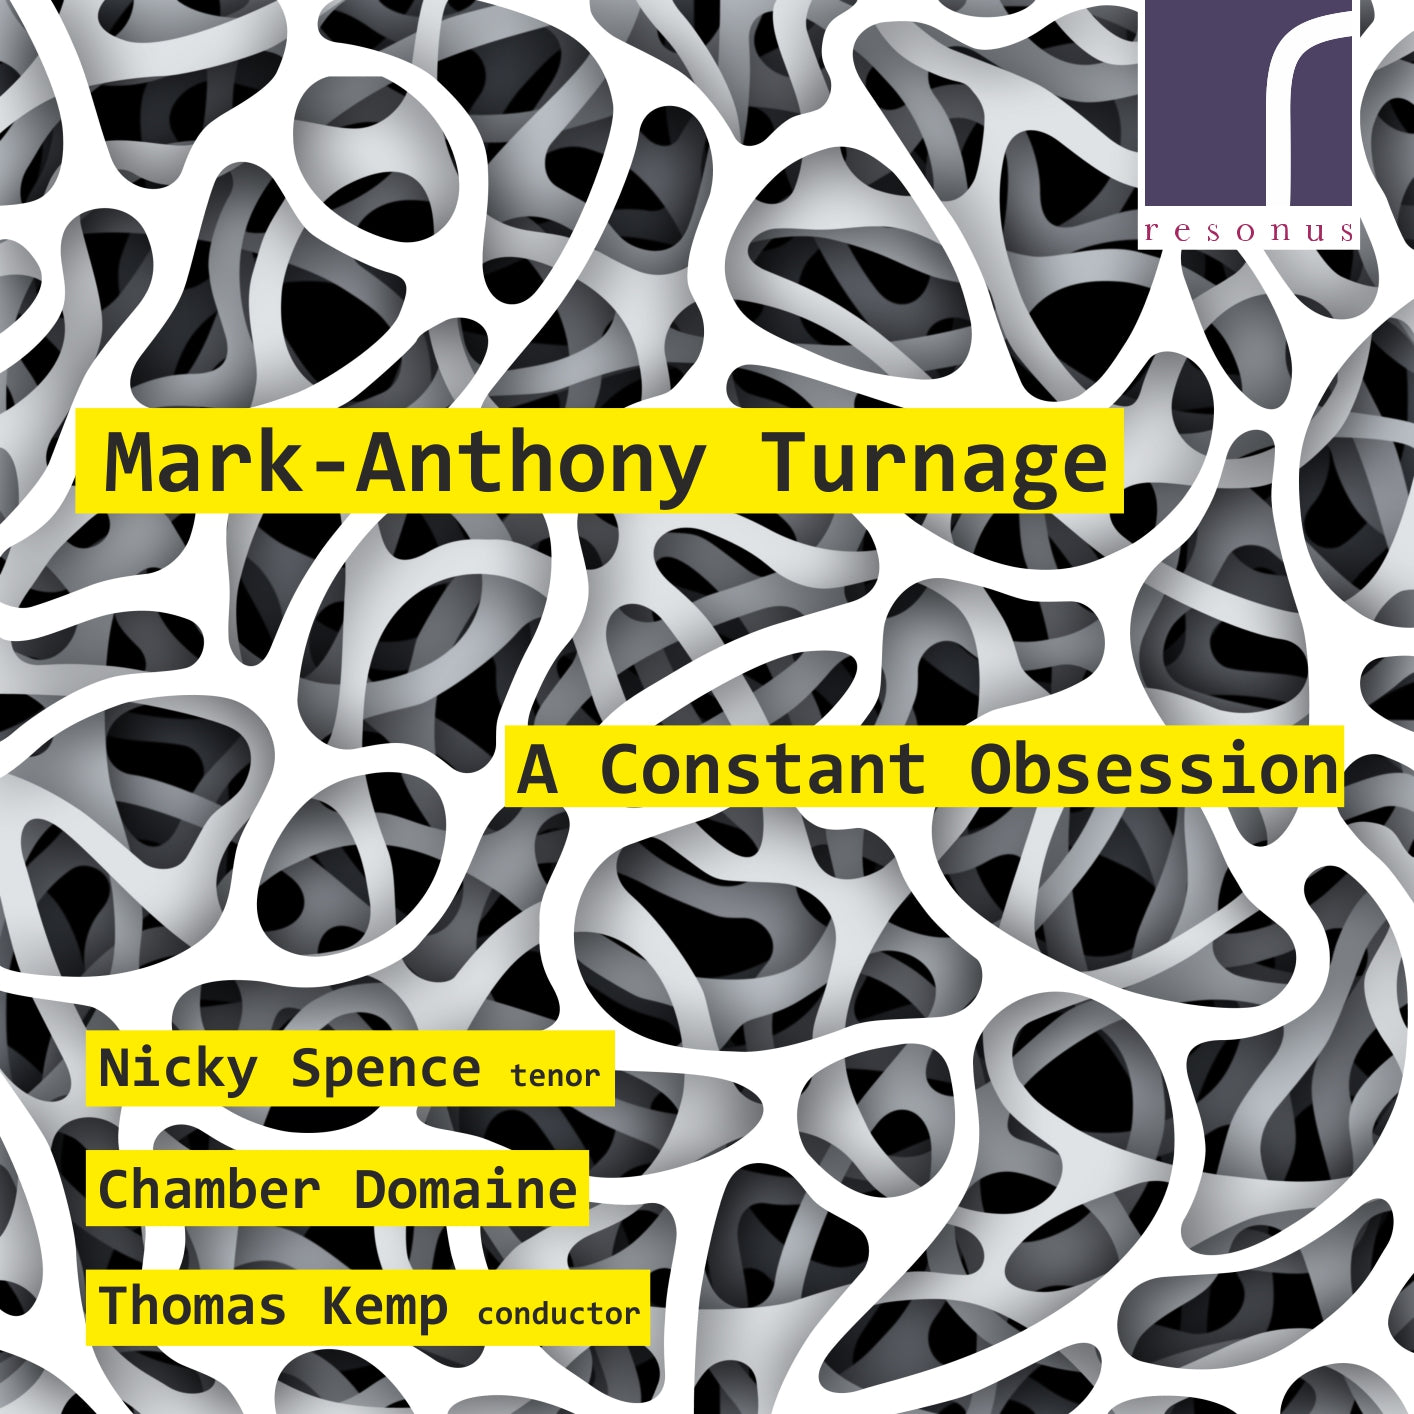 Mark-Anthony Turnage: A Constant Obsession